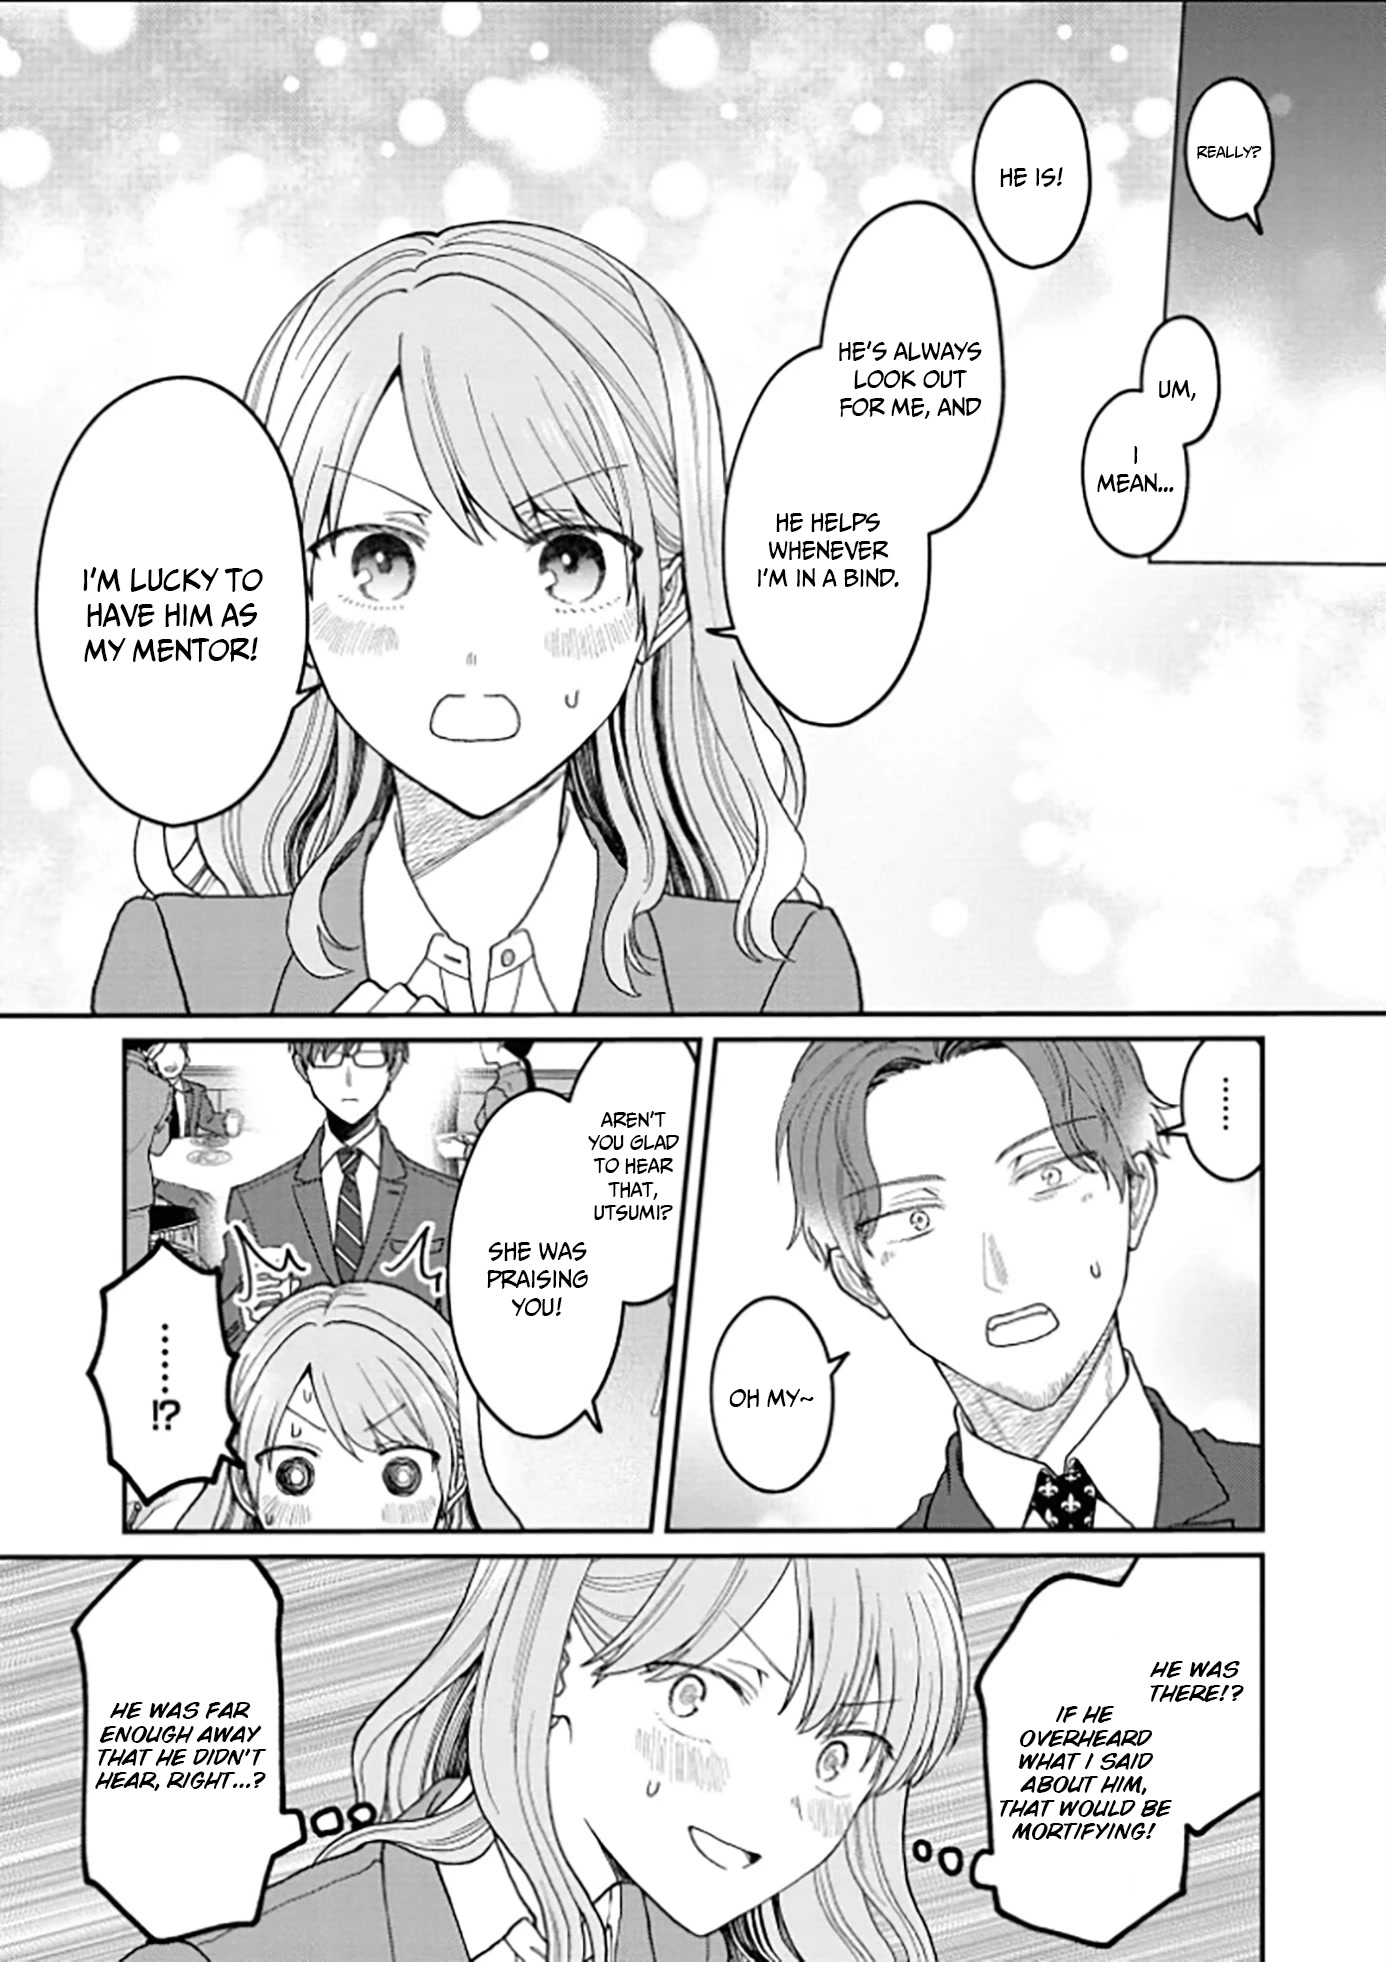 The New-Hire Who Could "Read" Emotions and the Unsociable Senpai - chapter 4 - #3